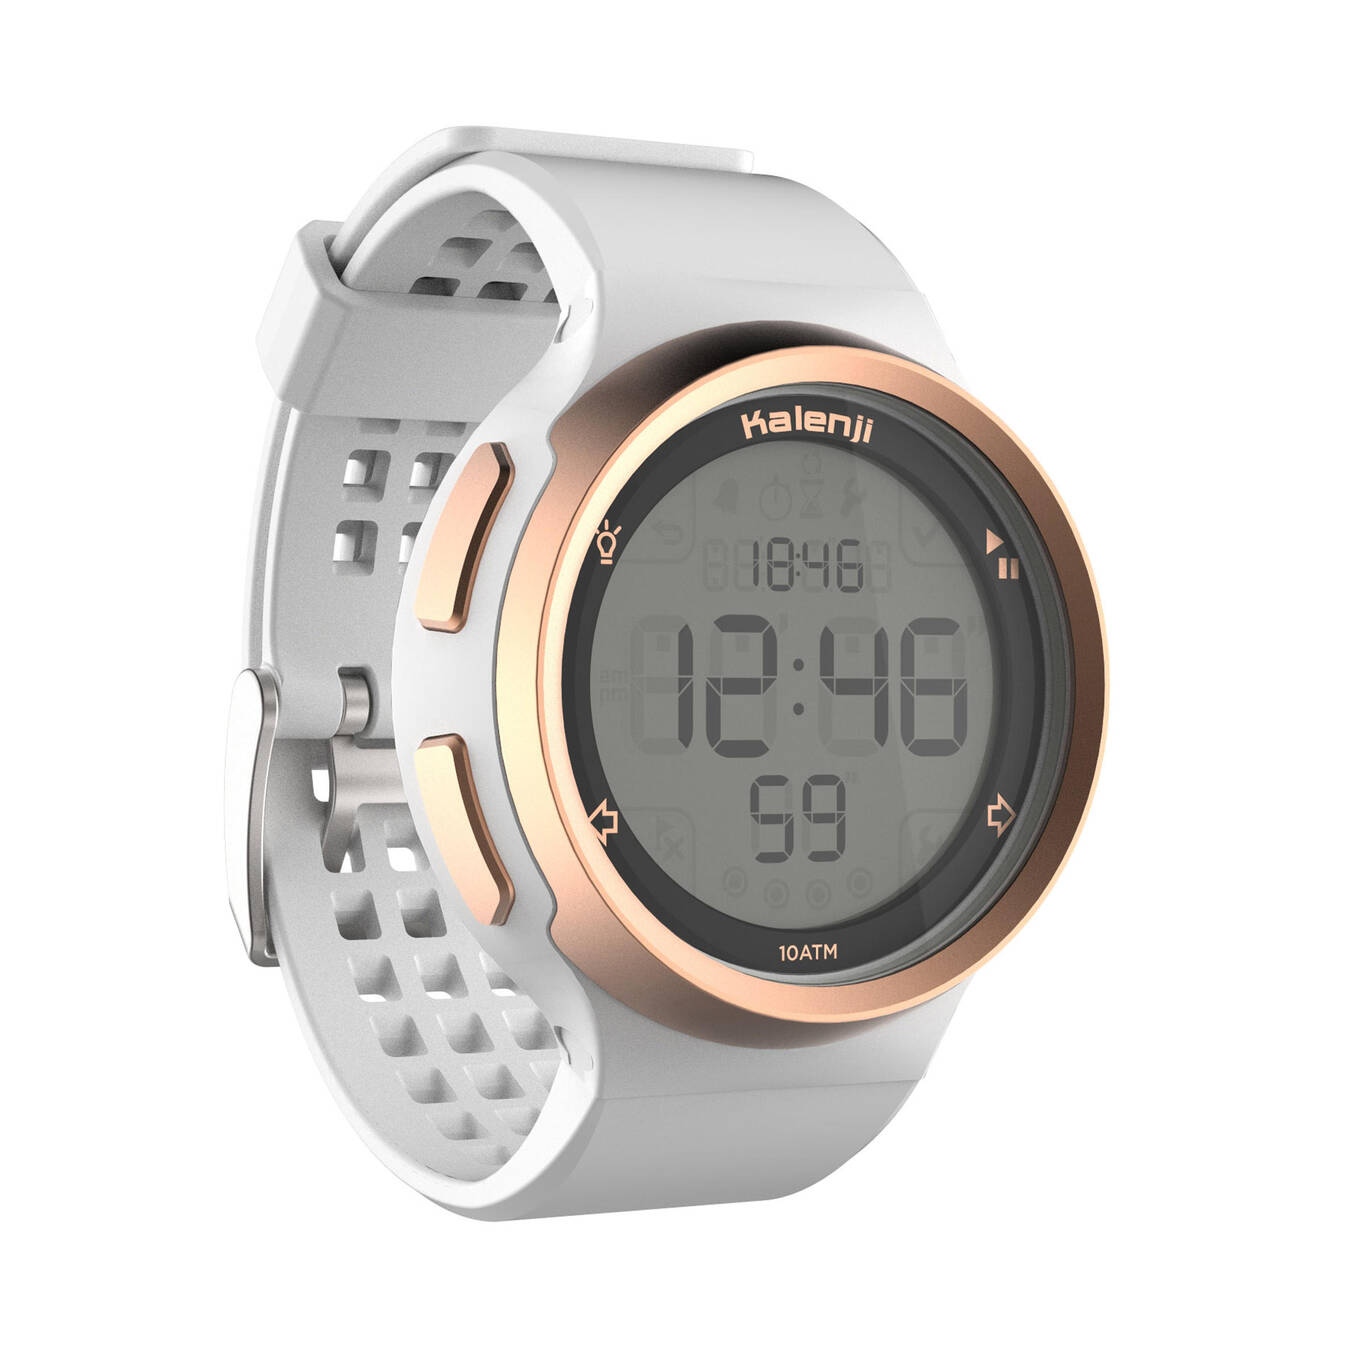 W900 M men's running stopwatch white and copper